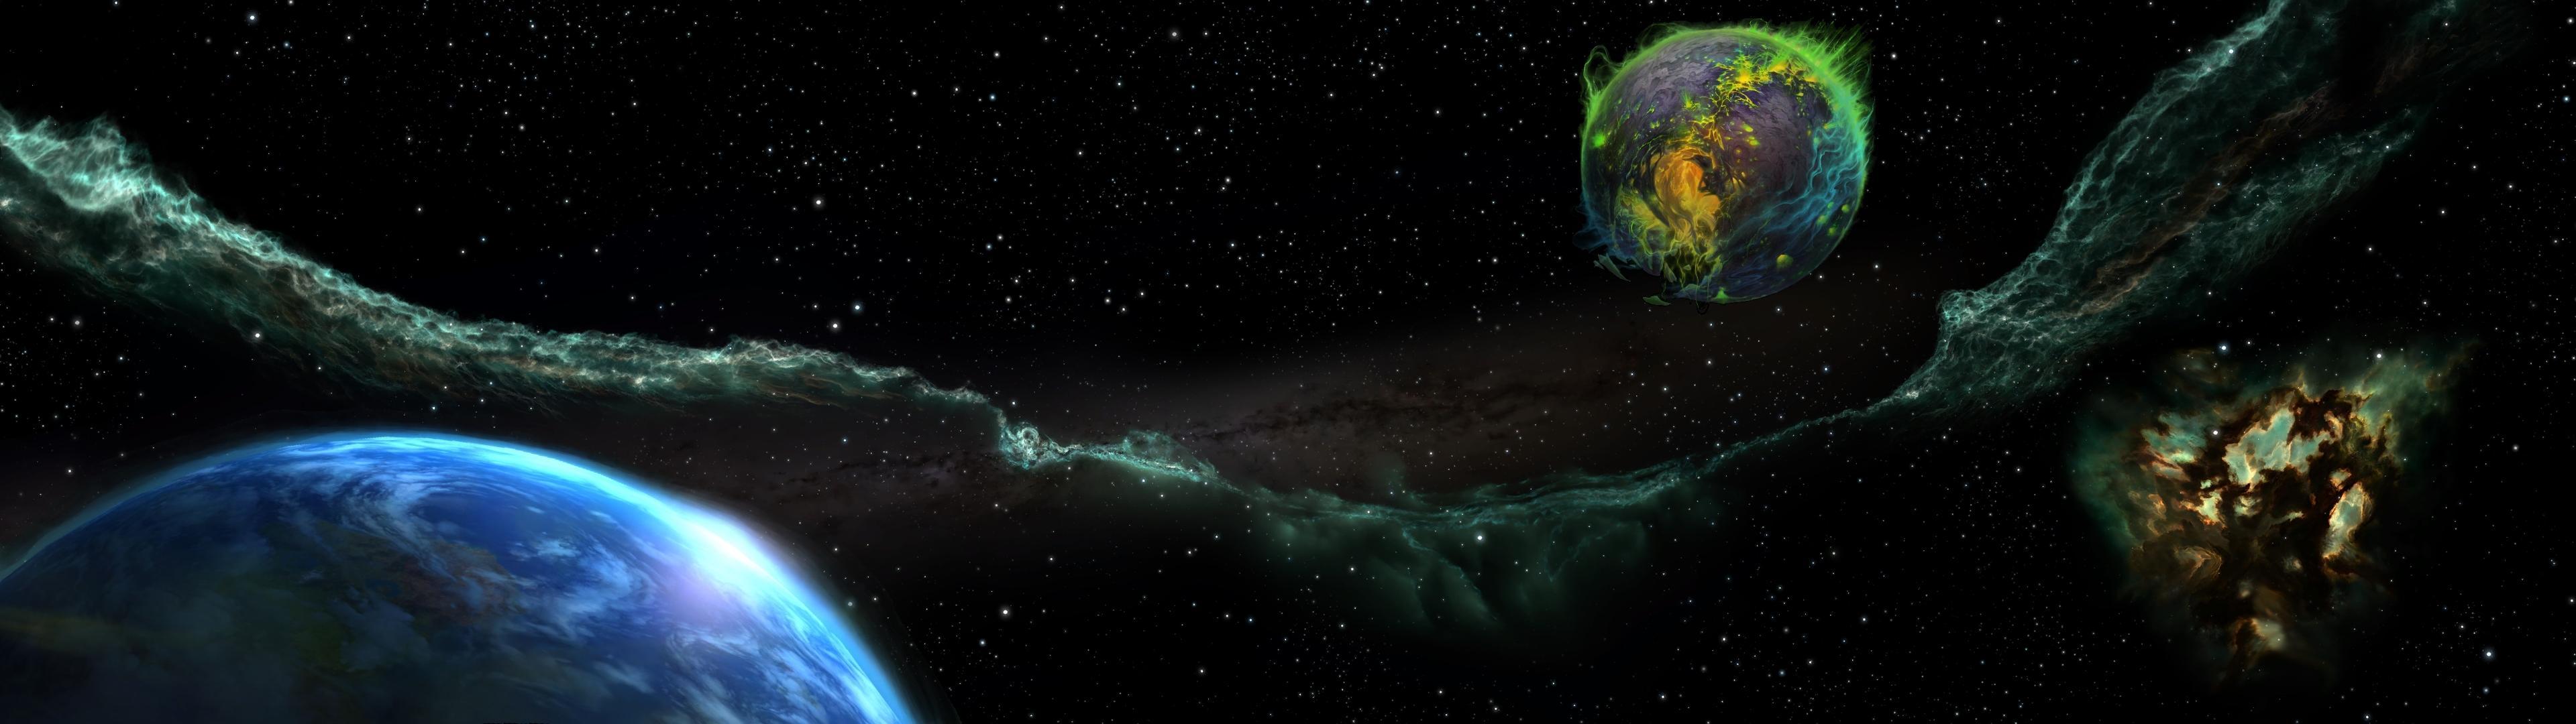 I threw together a wallpaper of Argus from Azeroth